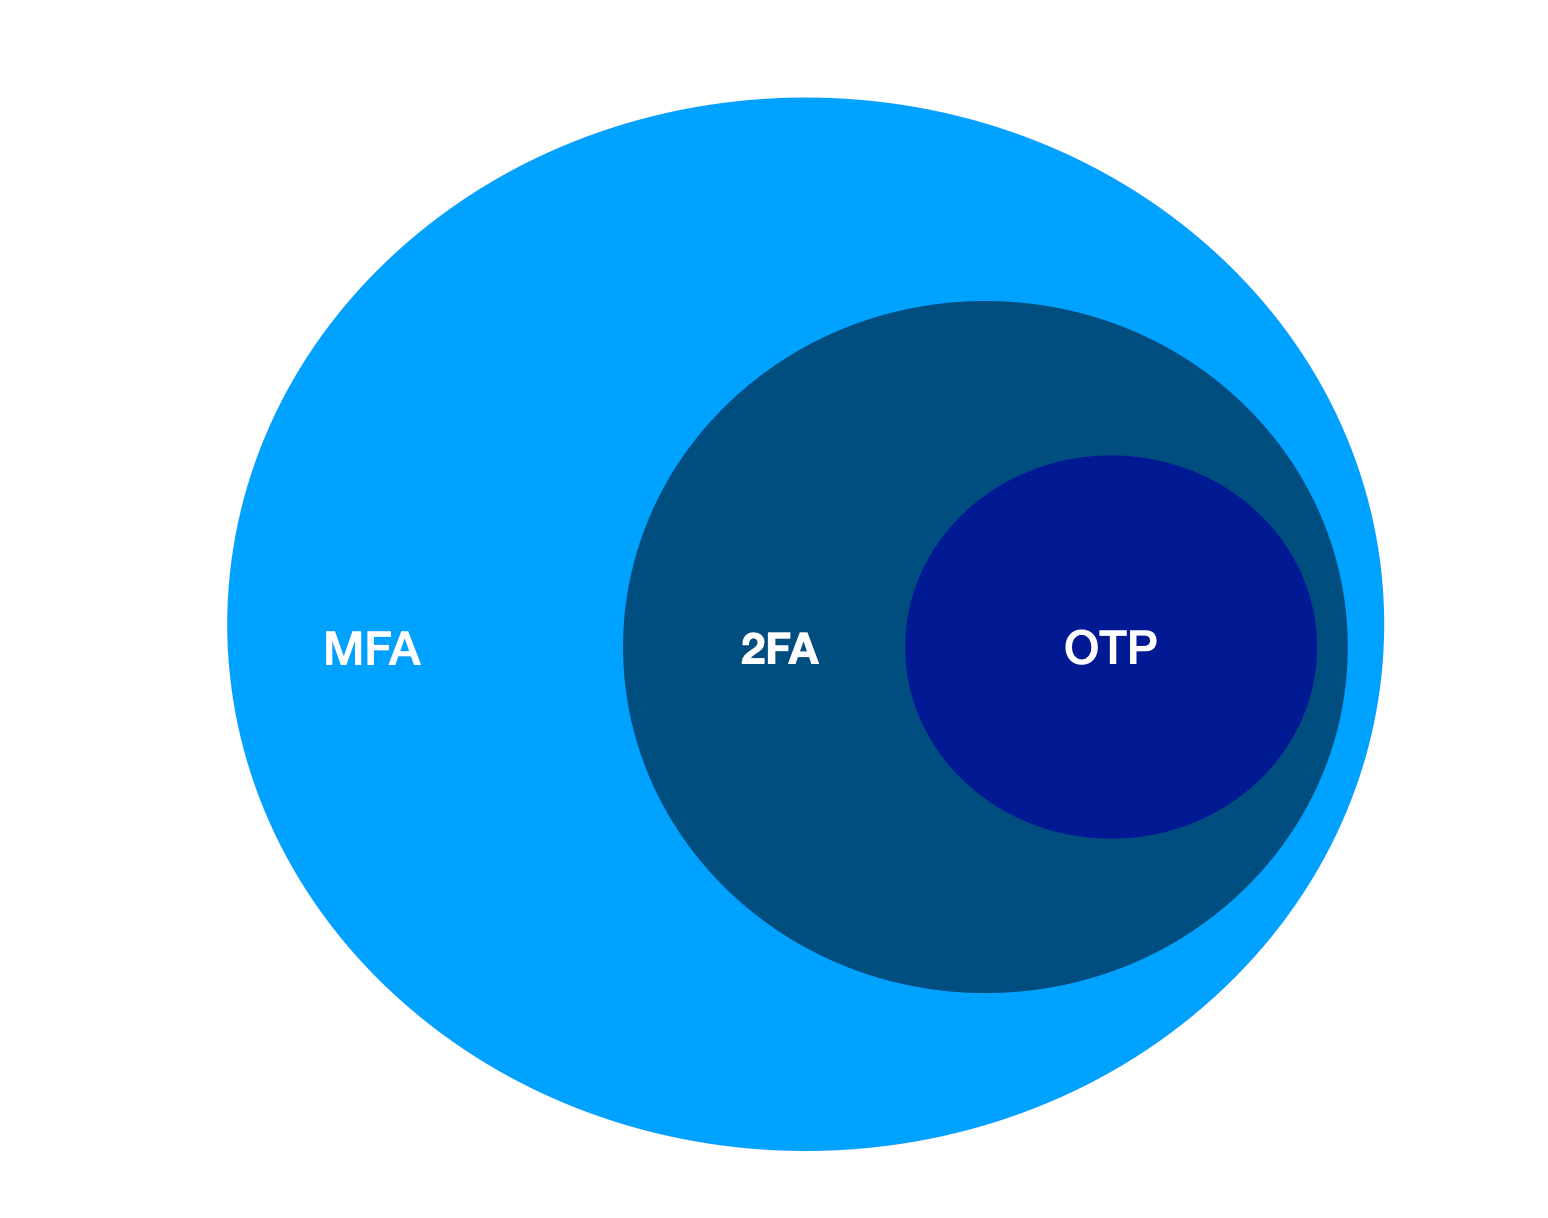 The one time password (OTP) is a form of Two-Factor Authentication(2FA). On its turn, 2FA is a form of Multi-Factor Authentication (MFA).